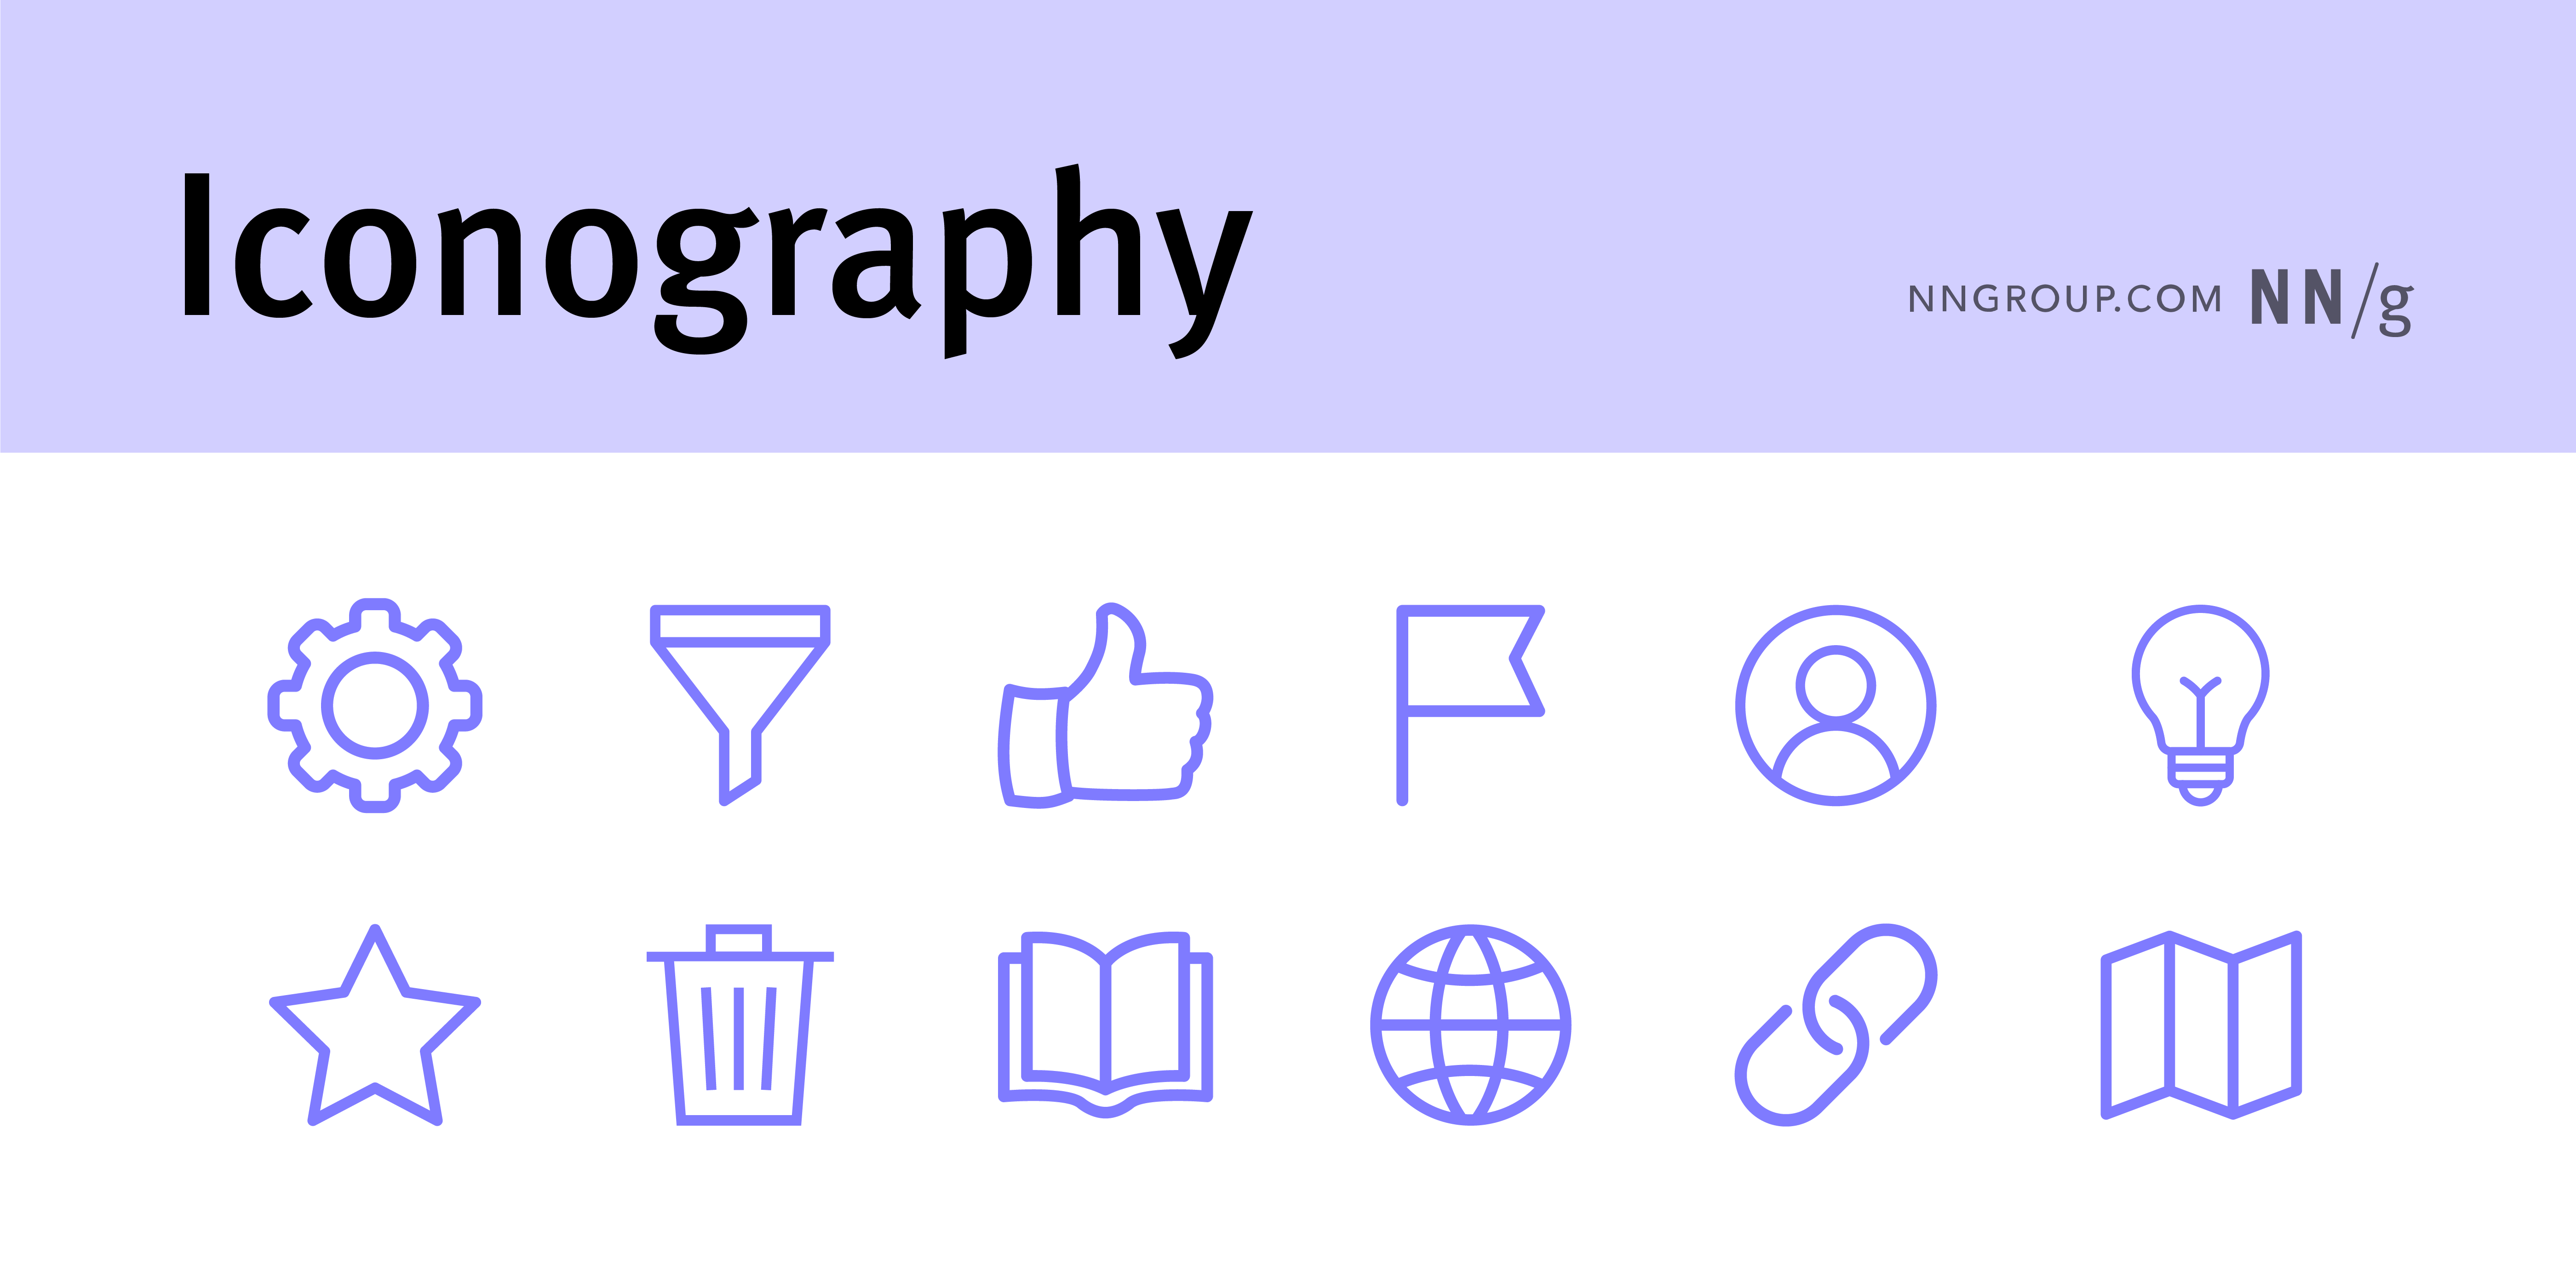 Row of common interface icons in light purple, including a gear, funnel, thumbs up, flag, user profile, light bulb, link chain, book, globe, and open book